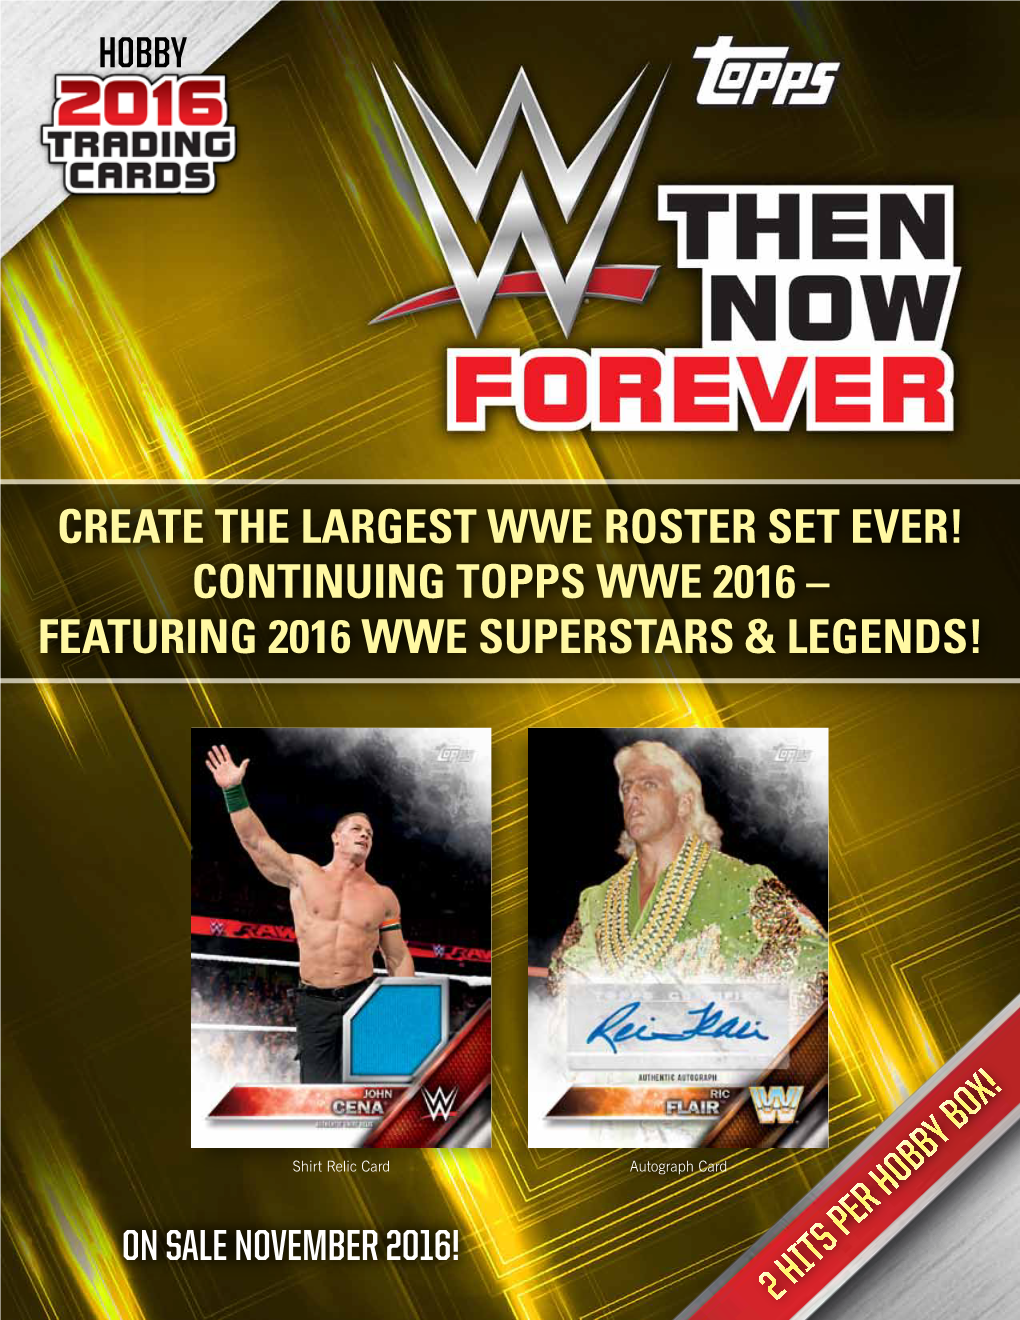 CREATE the LARGEST WWE ROSTER SET EVER! CONTINUING TOPPS WWE 2016 – Featuring 2016 WWE SUPERSTARS & LEGENDS!